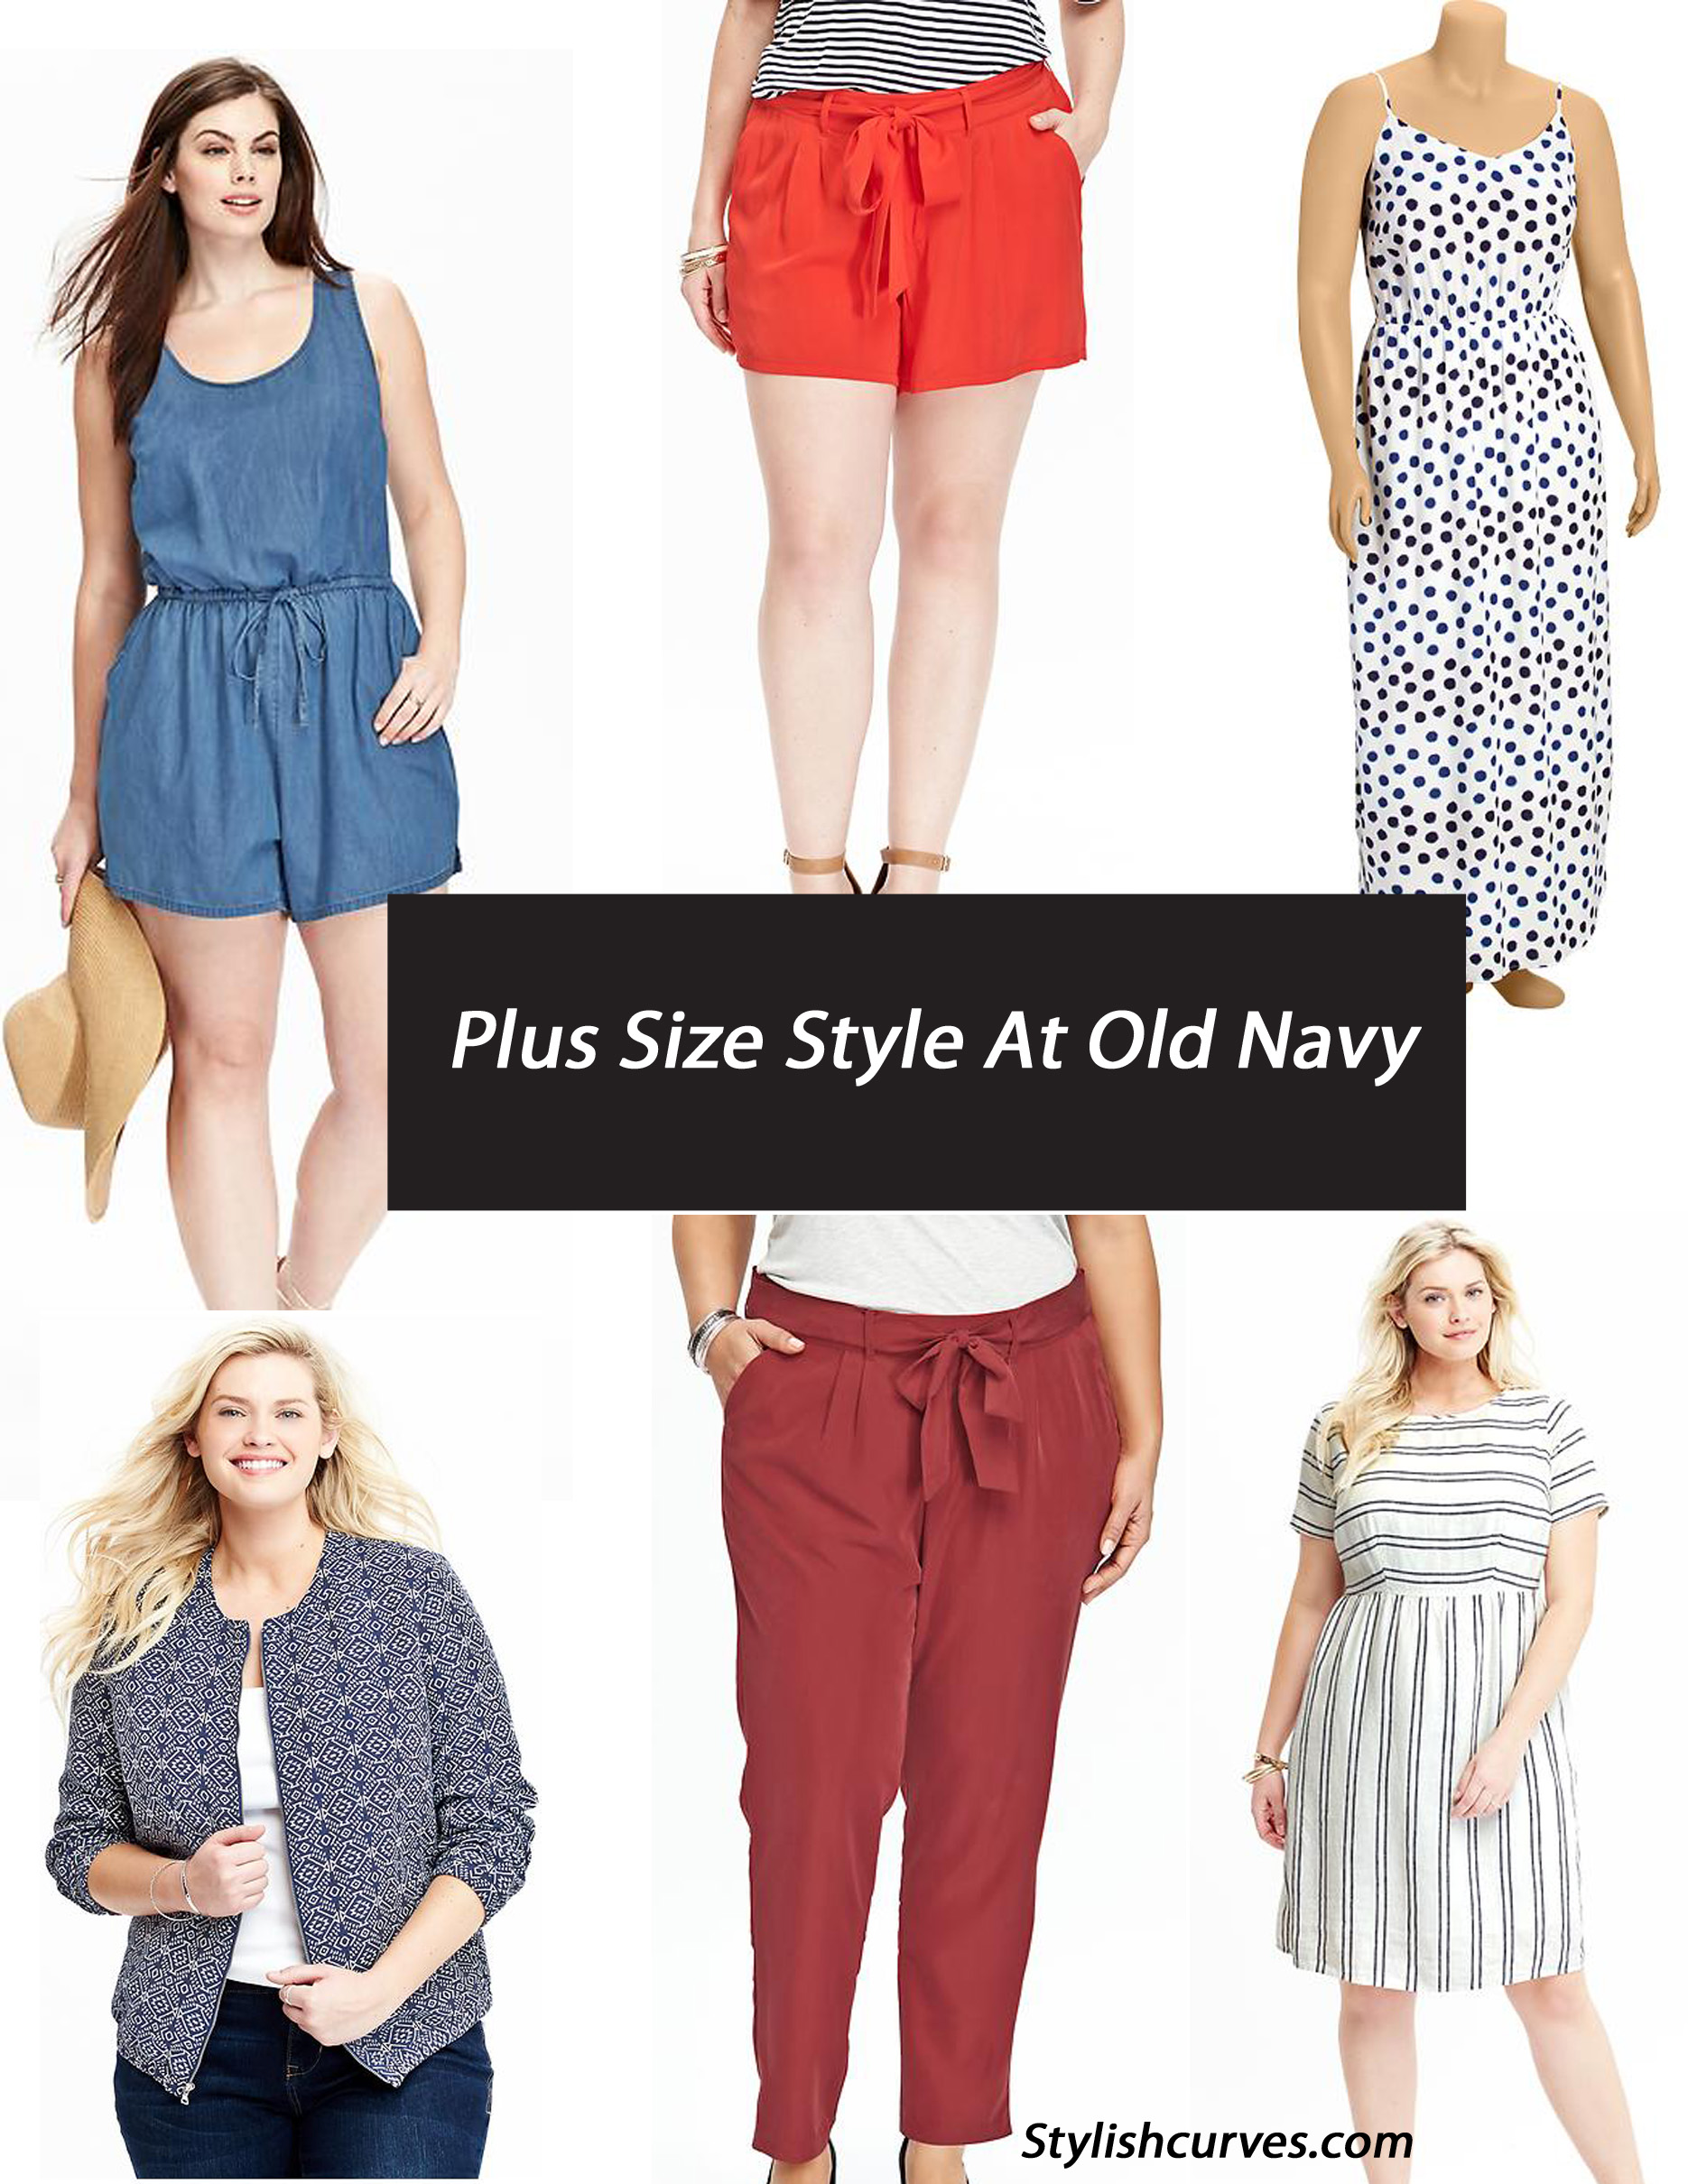 Old Navy Has Stepped Up Their Plus Size Style And They Tapped Plus Size ...